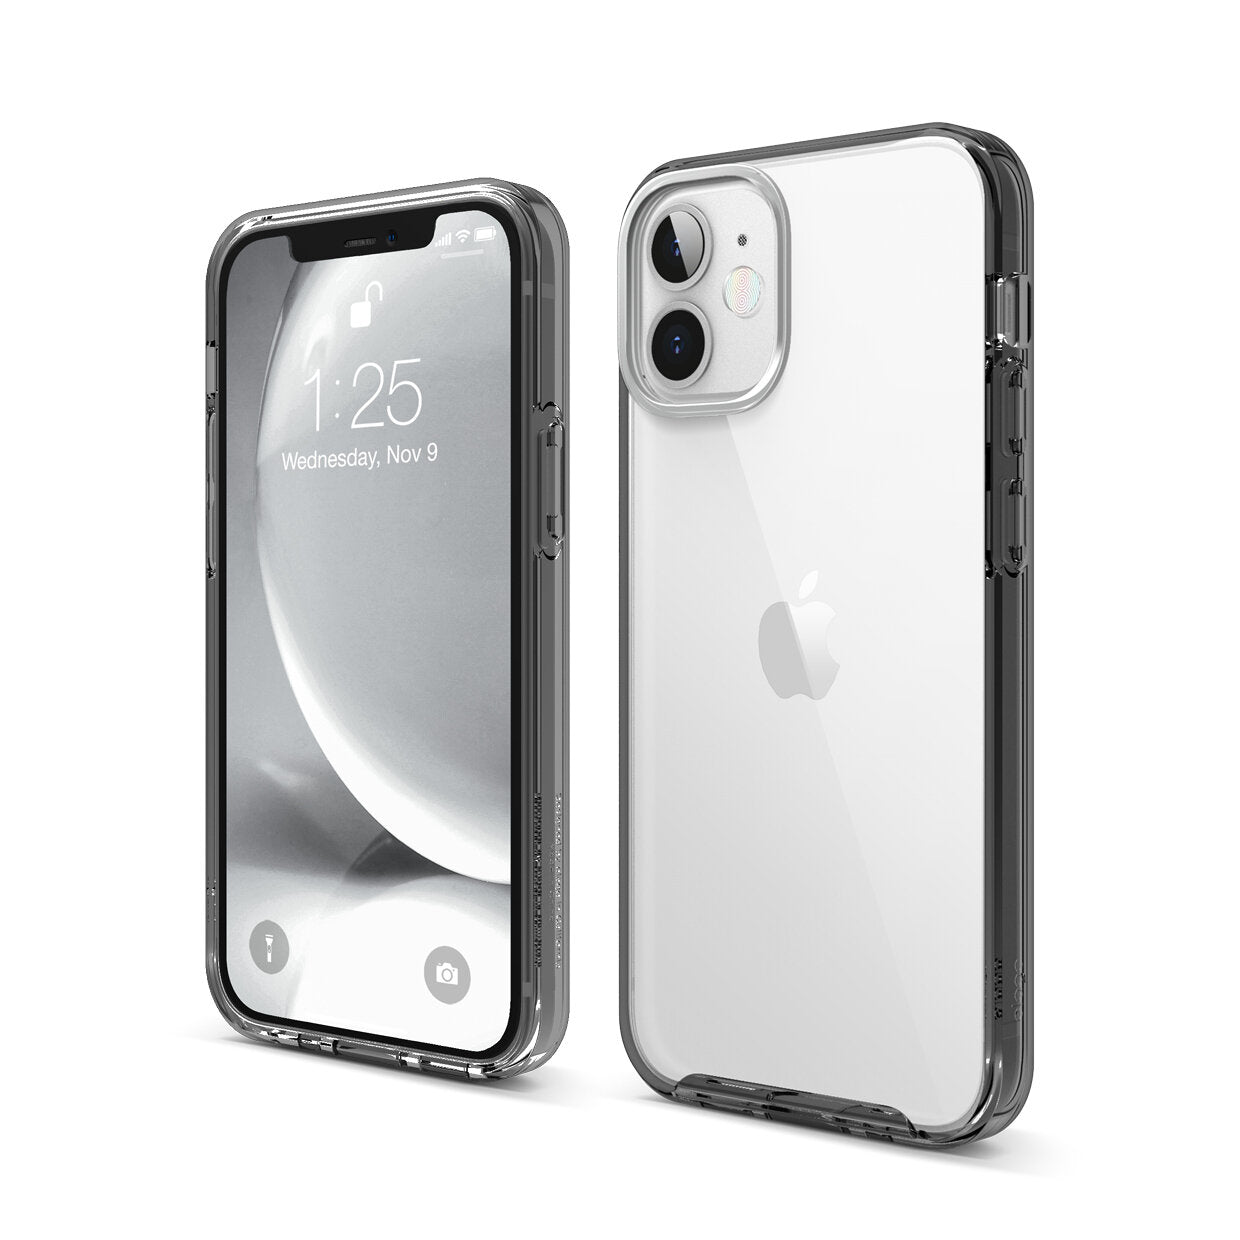 Hybrid Clear Case [6 Colors]